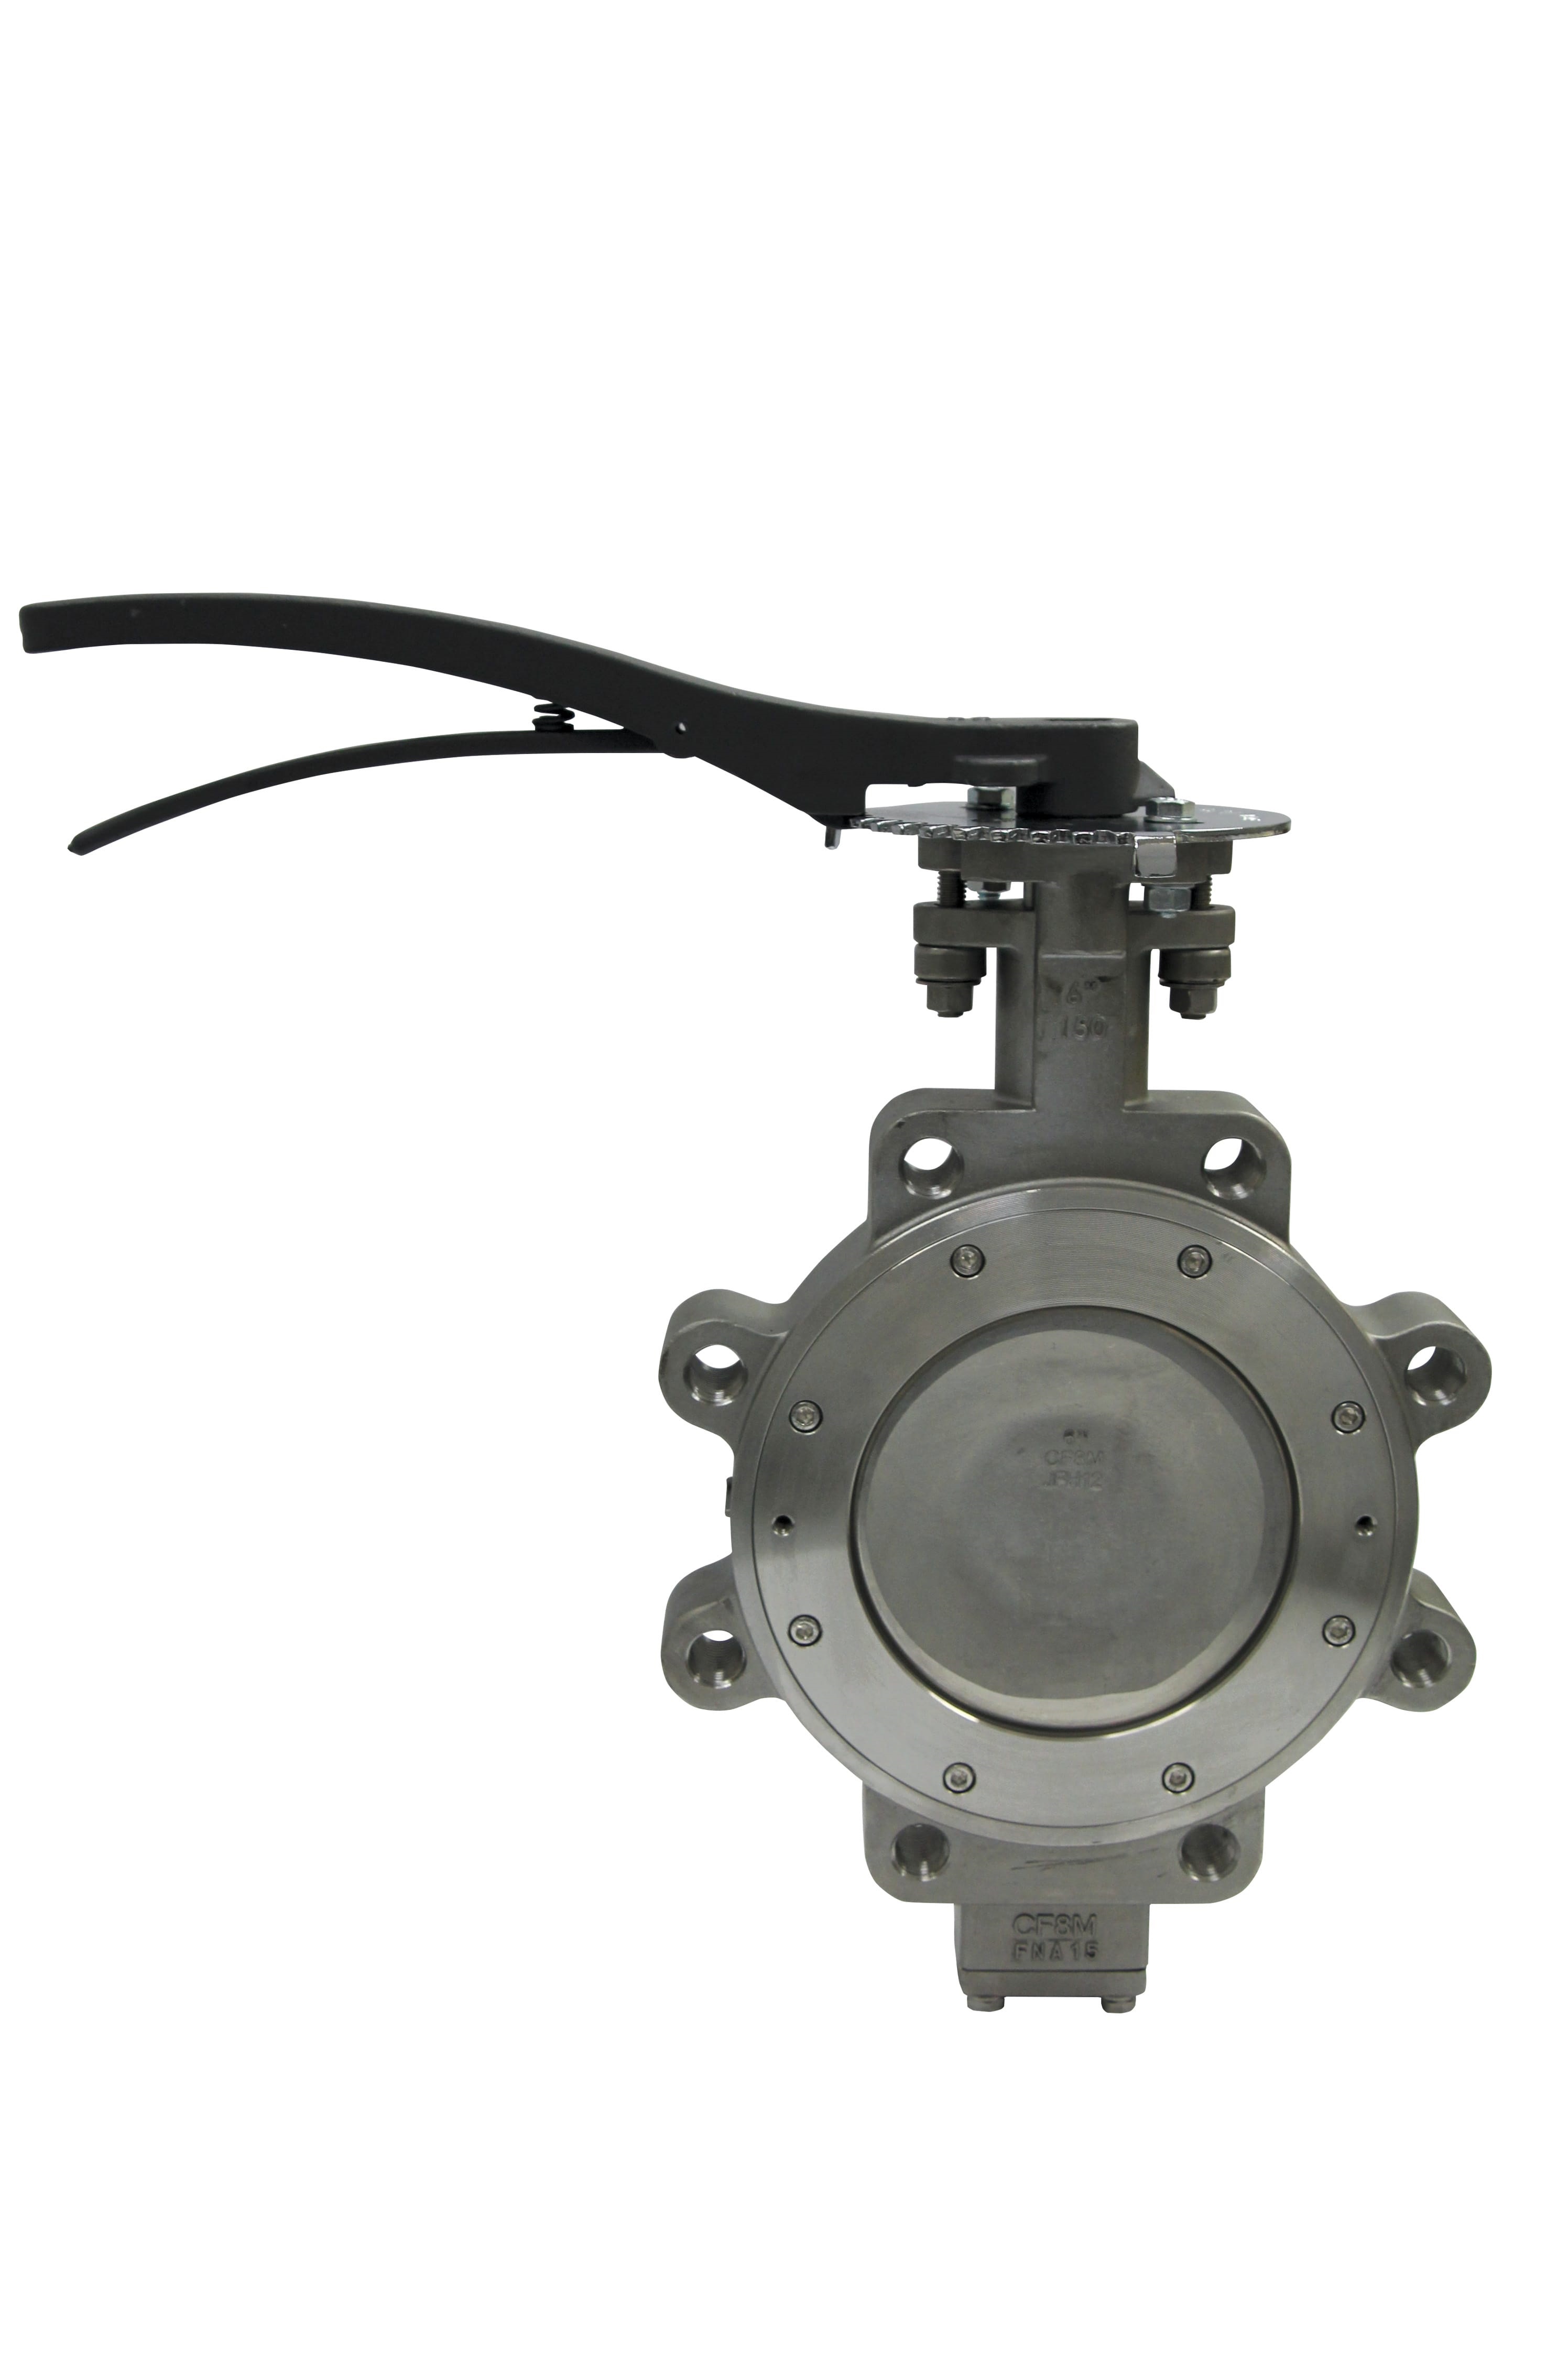 Preview image for Apollo Class 150 Stainless Steel Butterfly Valve with Stainless Steel Disc, Stem, & Pin, RTFM Seat, Worm Gear Operator, Standard (2 x Lug)